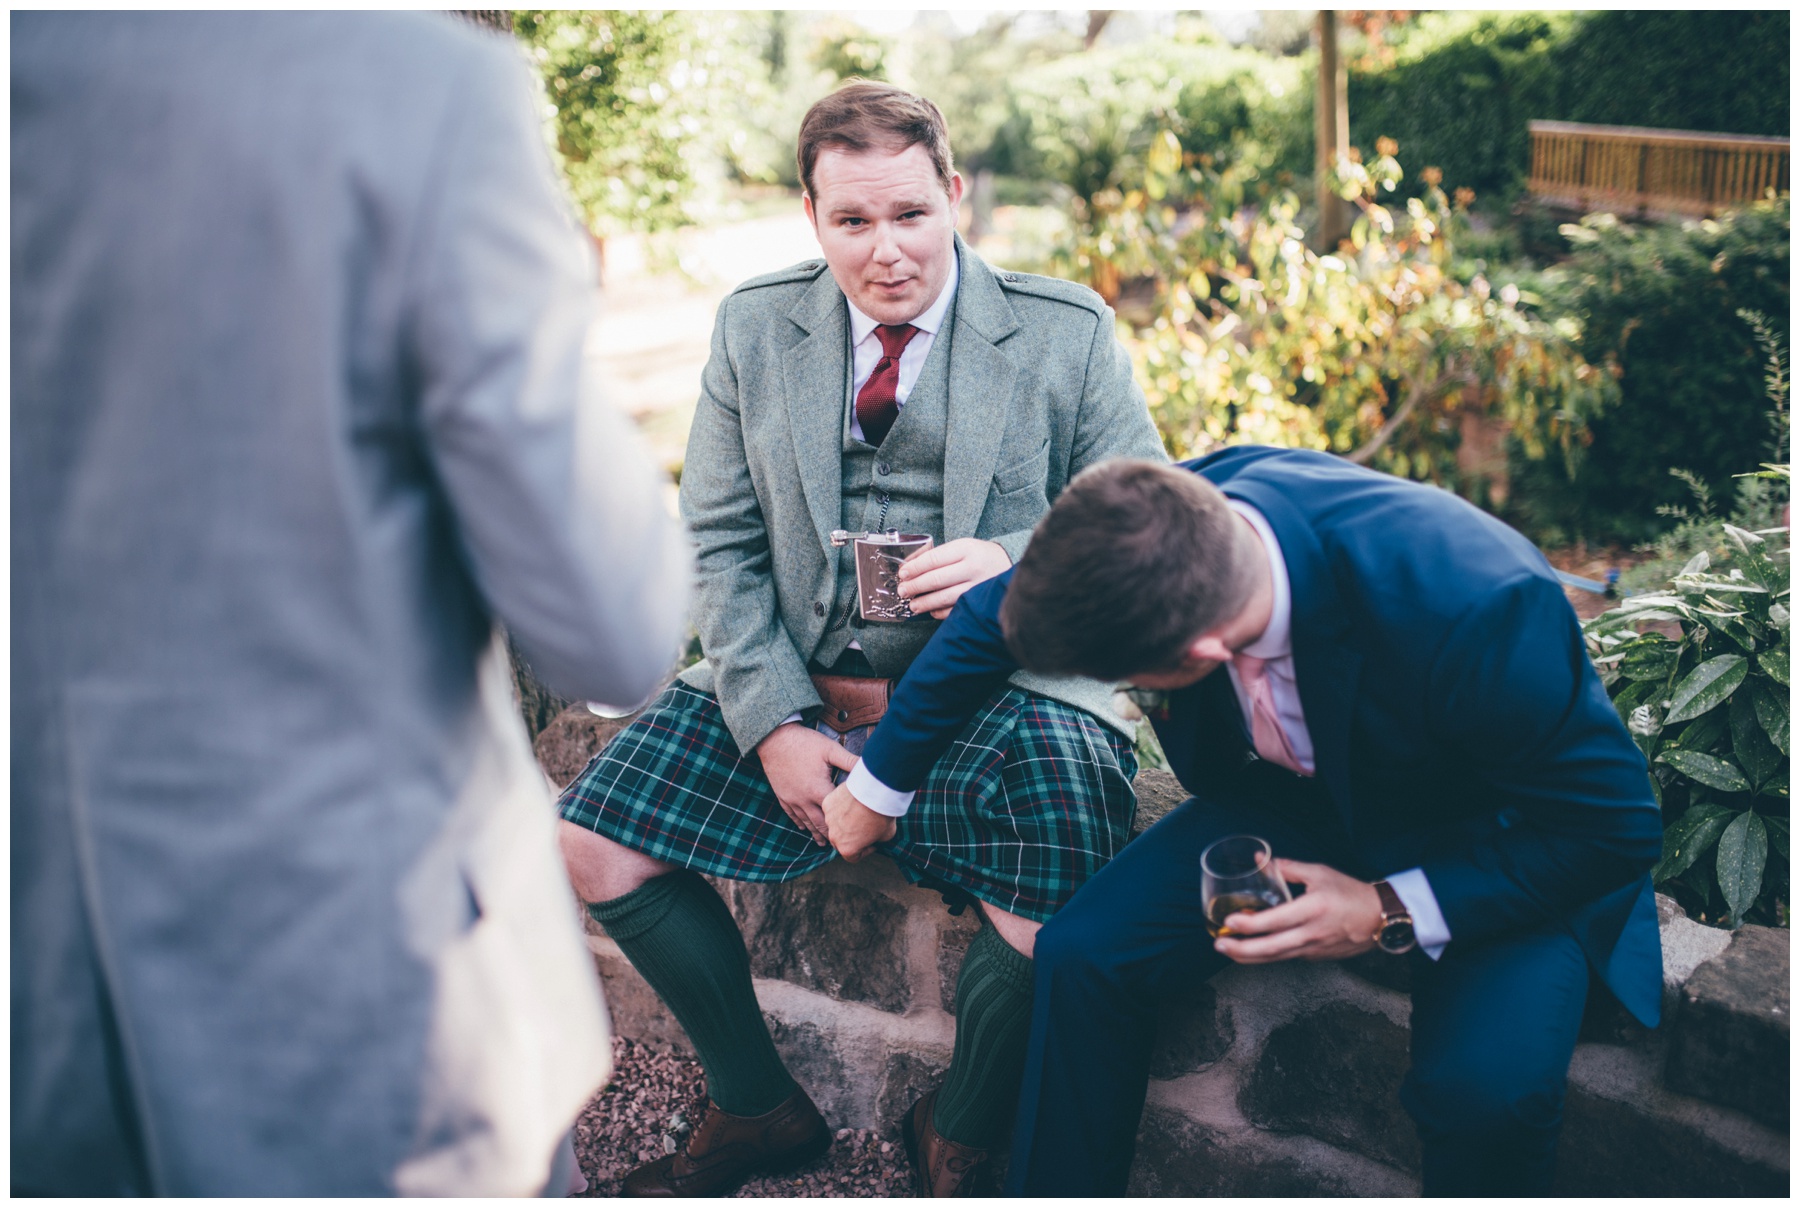 Wedding guest tried to look up another guests kilt at Tilstone House wedding in Cheshire!